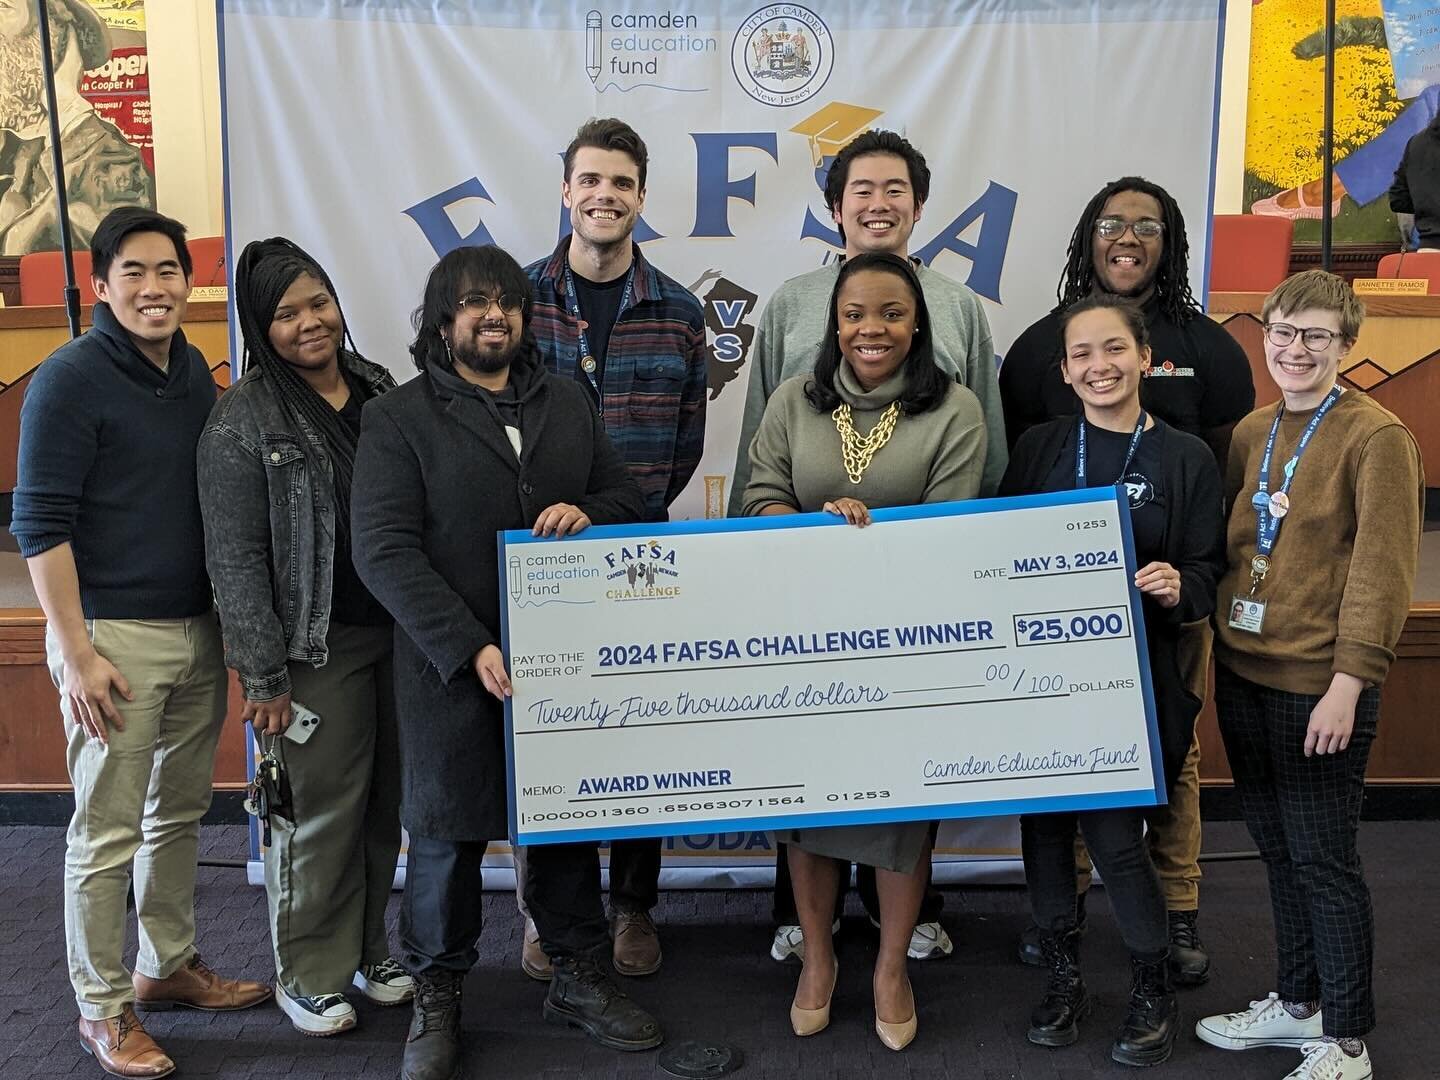 The Camden FAFSA Challenge Press Conference was one for the books! 📔✏️

A major major thank you to @camdenedfund_nj for allowing us to be part of this day and for making all of this possible! ❤️